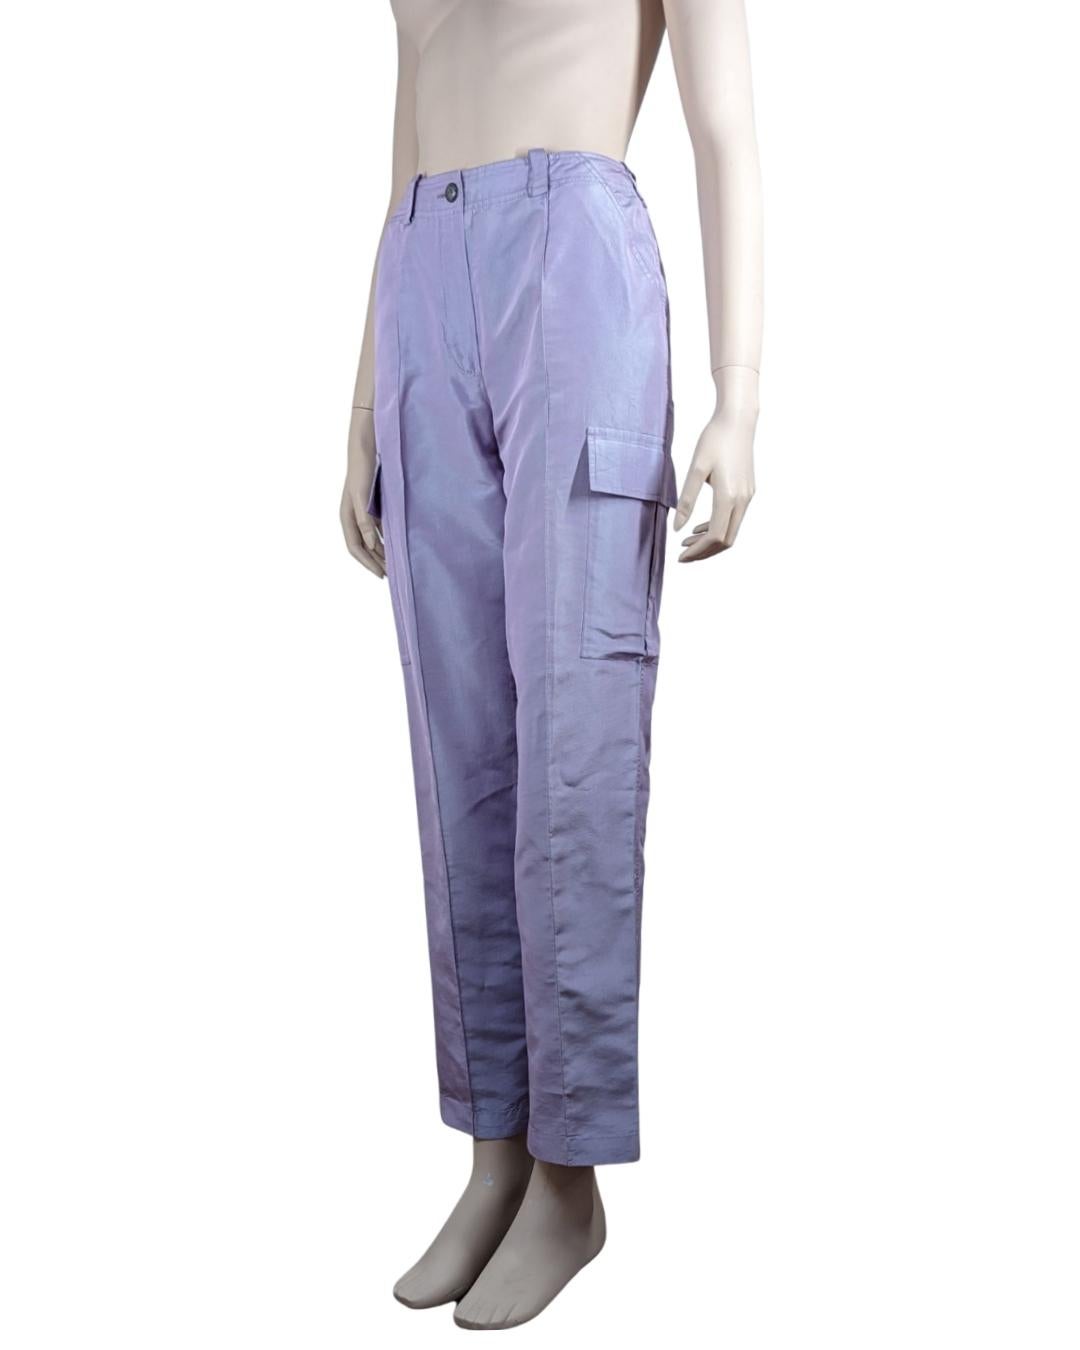 Women's Chanel Fall 1996 Lila Iridescent Cargo Pants For Sale